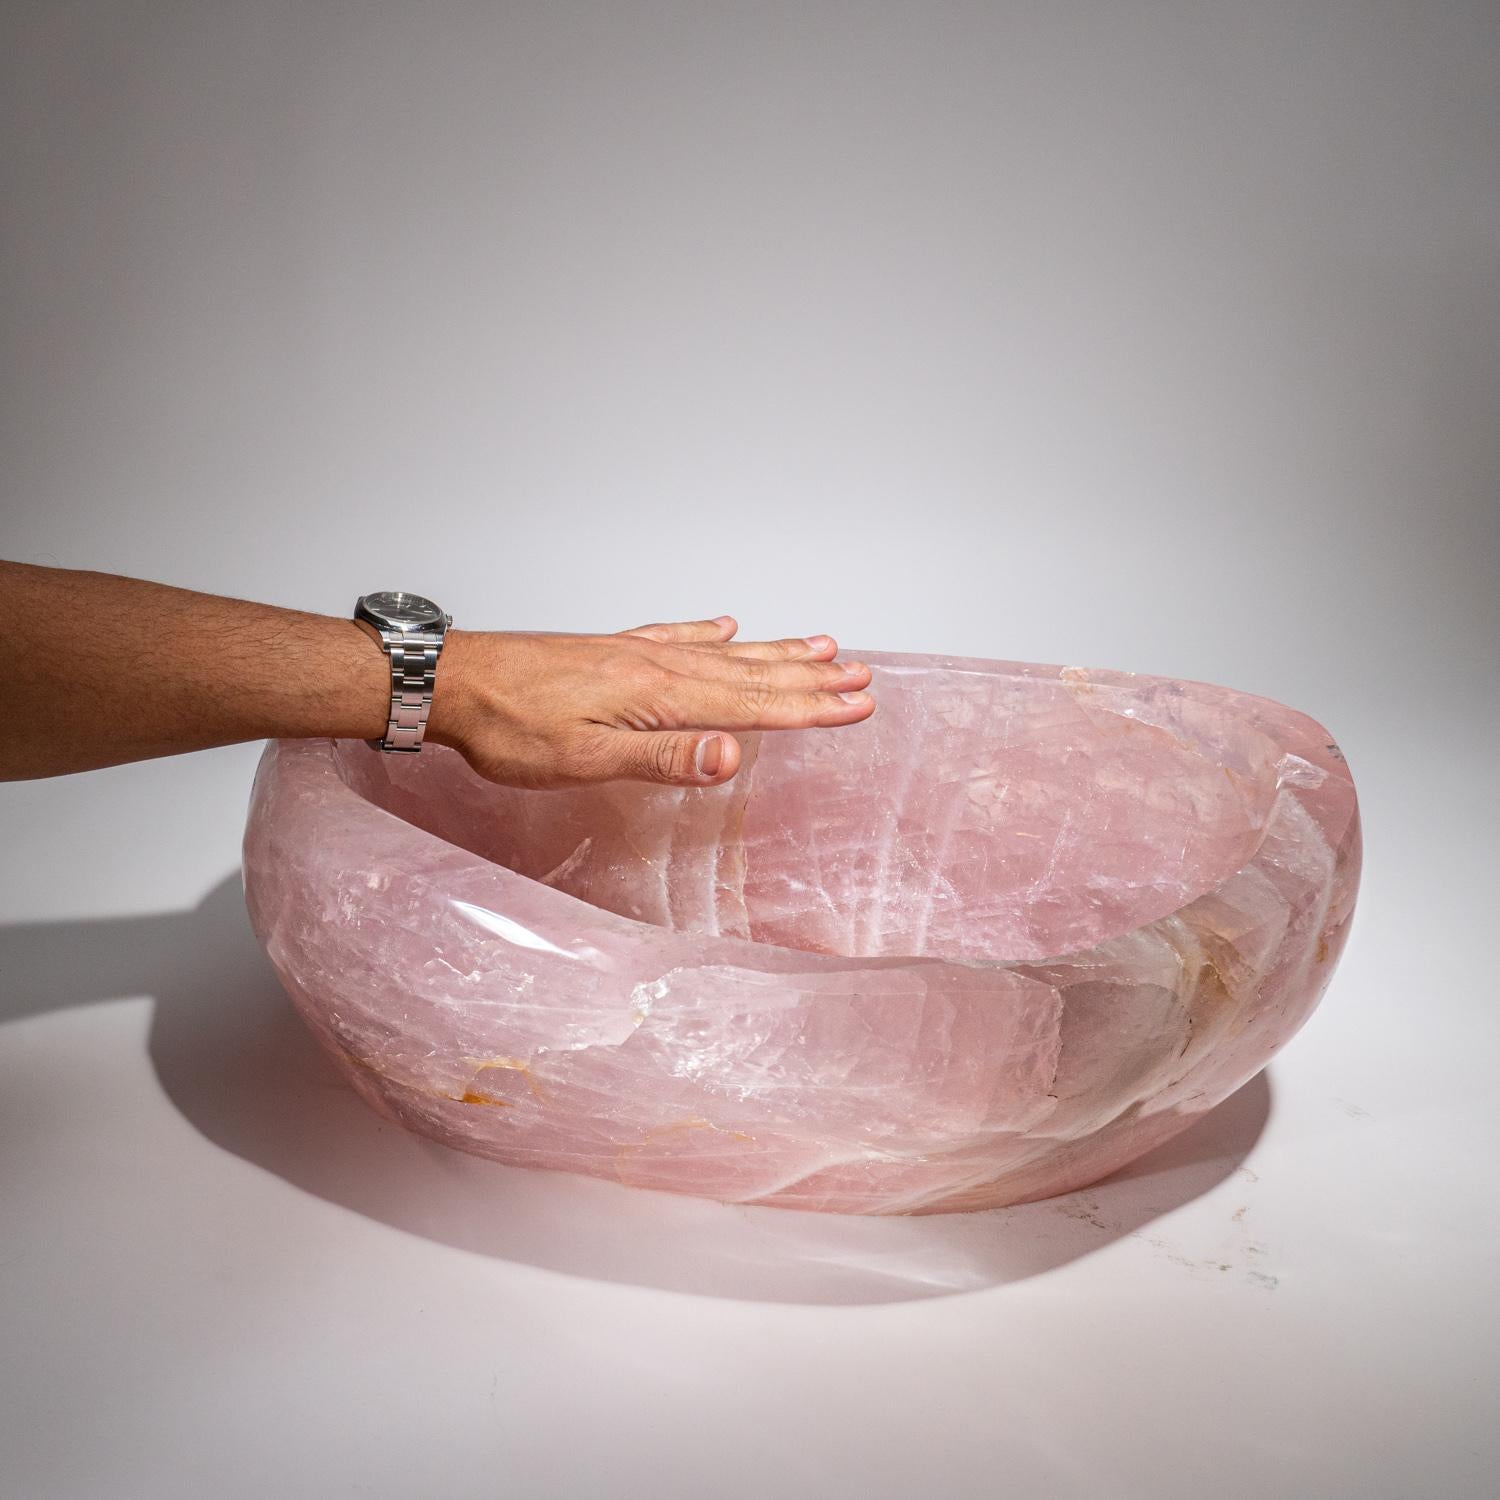 Beautiful one-of-a-kind, huge handmade polished freeform bowl made of natural Madagascan rose quartz. All sides have been hand polished to a smooth mirrored finish. This massive bowl will be a conversation piece and a beautiful centerpiece to